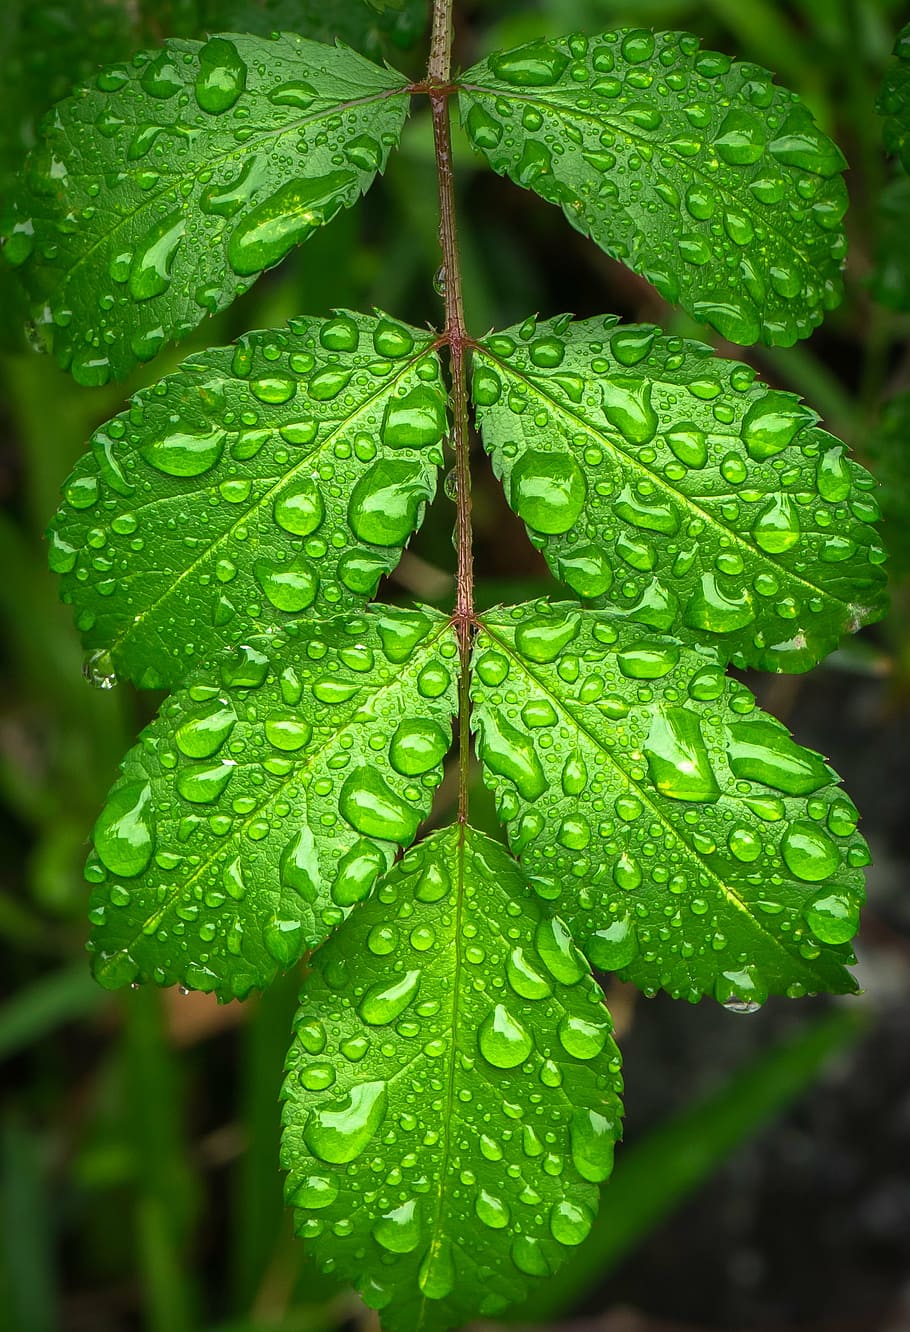 green leafed plant, the leaves, plants, hwalyeob, nature, green, abstract, leaf, dew, trickle